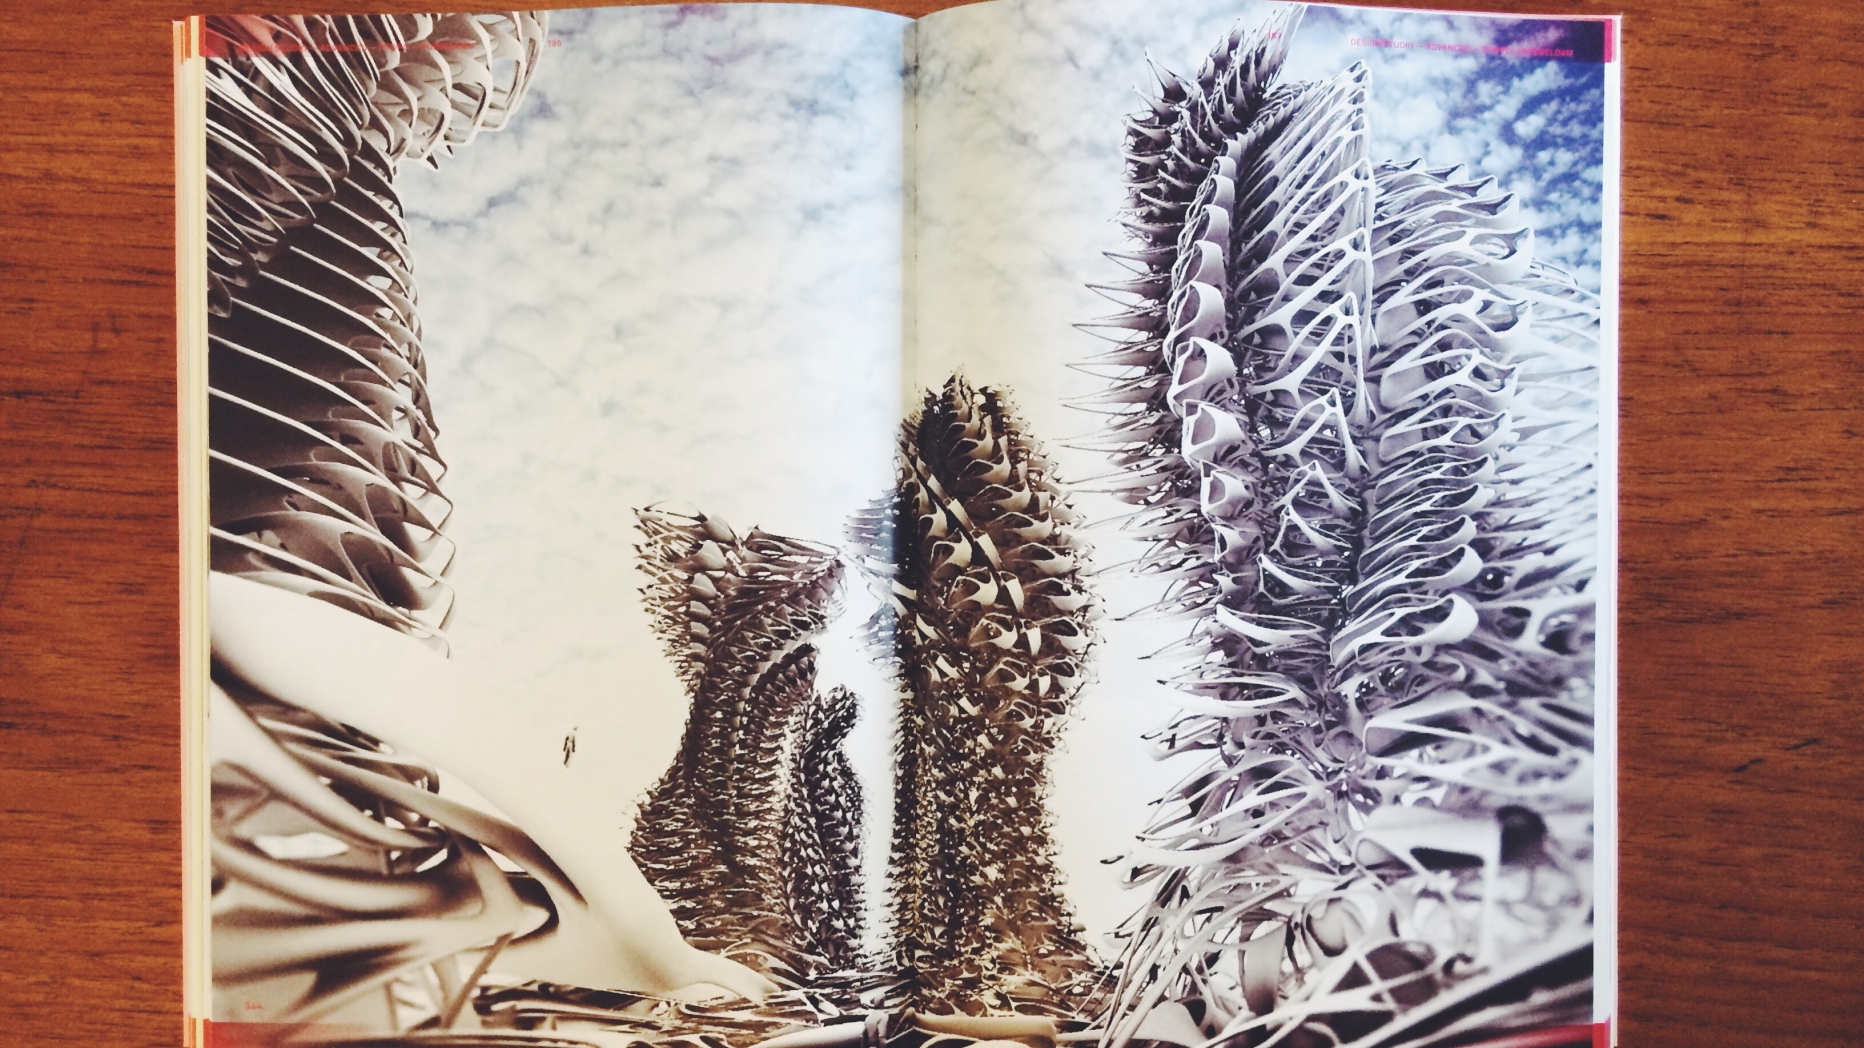 Opened volume on a wooden table. The pages display a drawing of large spiney organic looking structures.